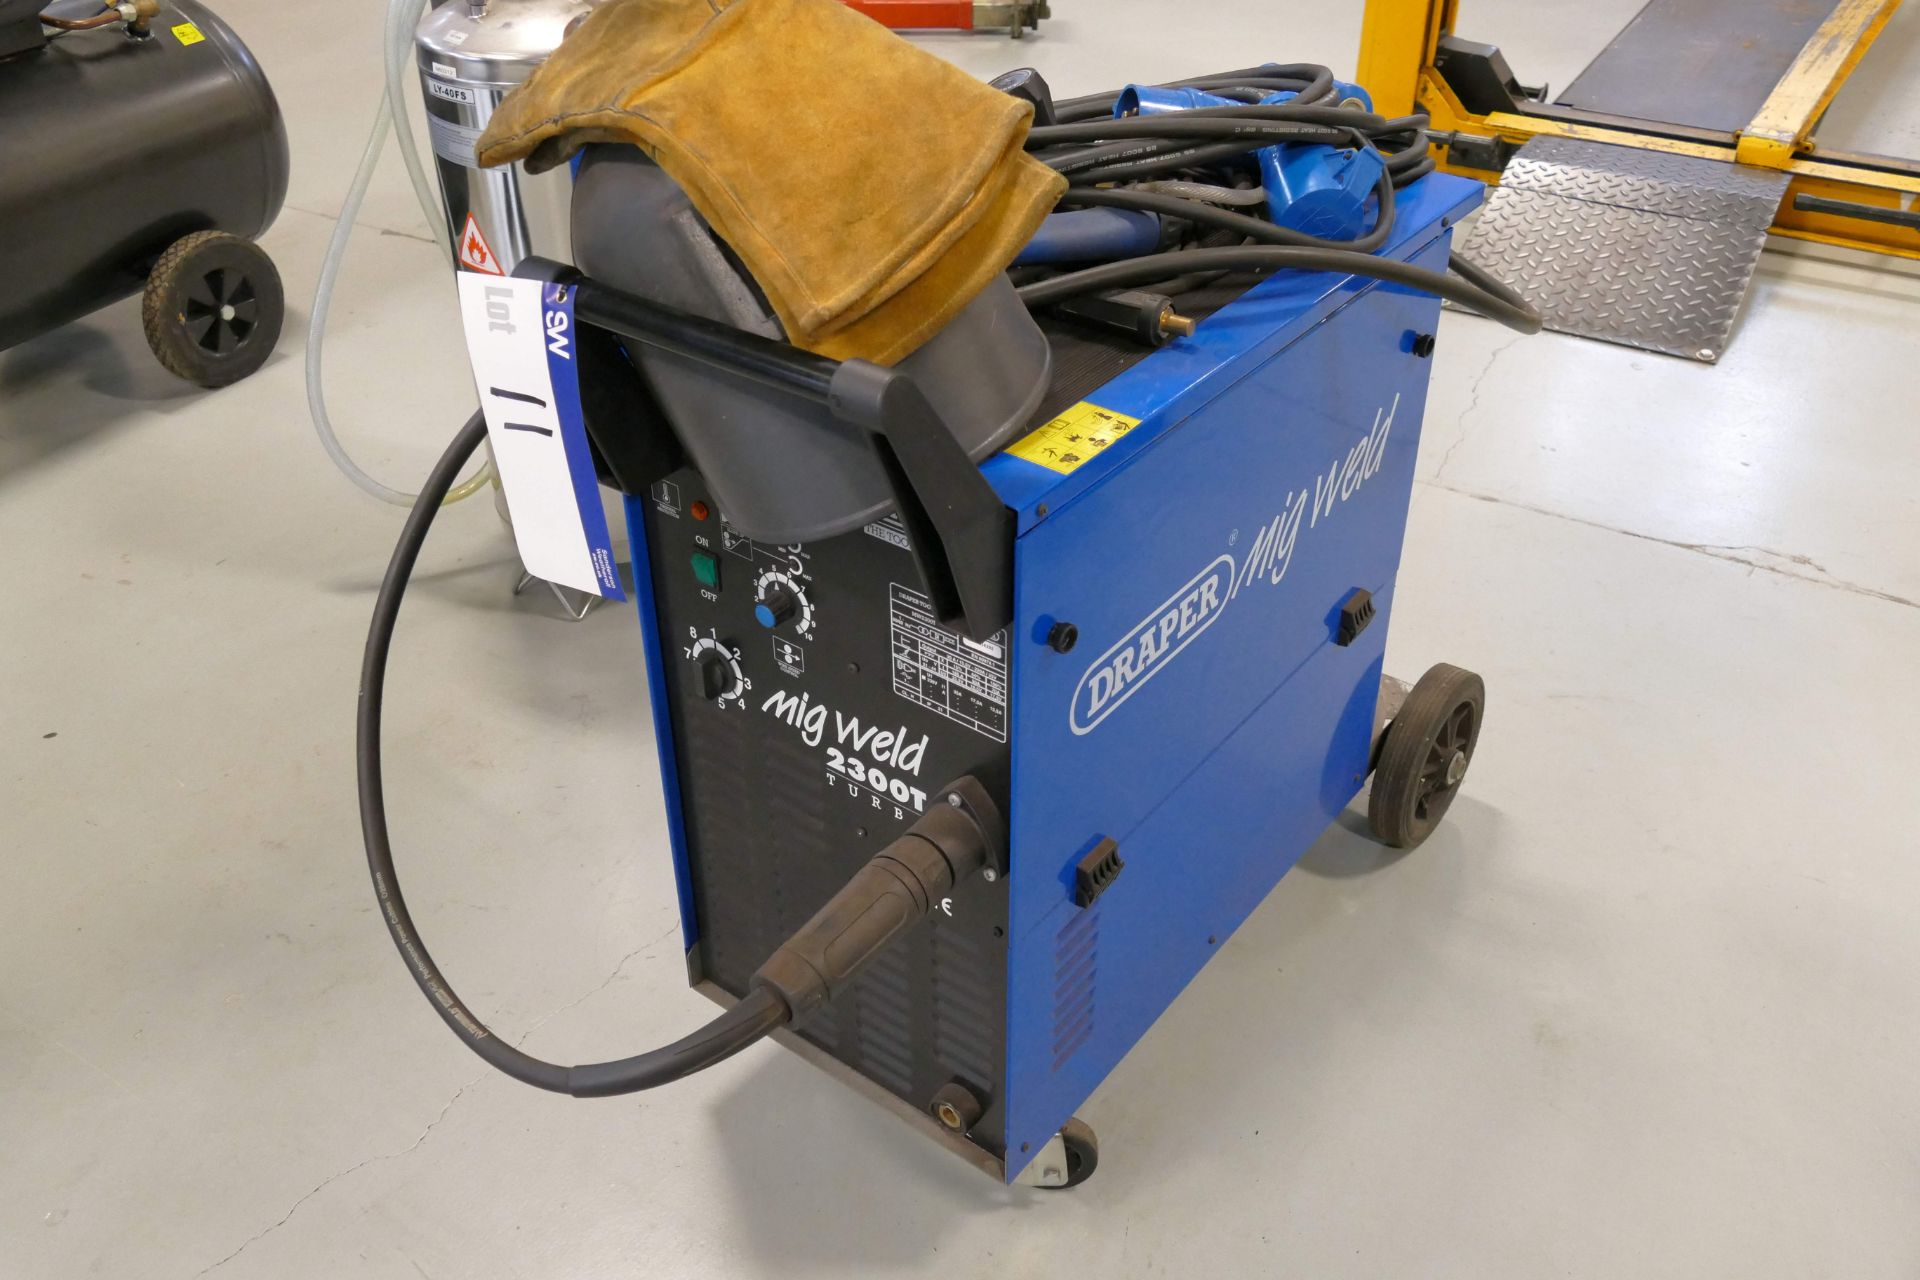 Draper 2300T TURBO MIG WELDING UNIT, serial no. N538292, with assorted gauges, gloves and mask